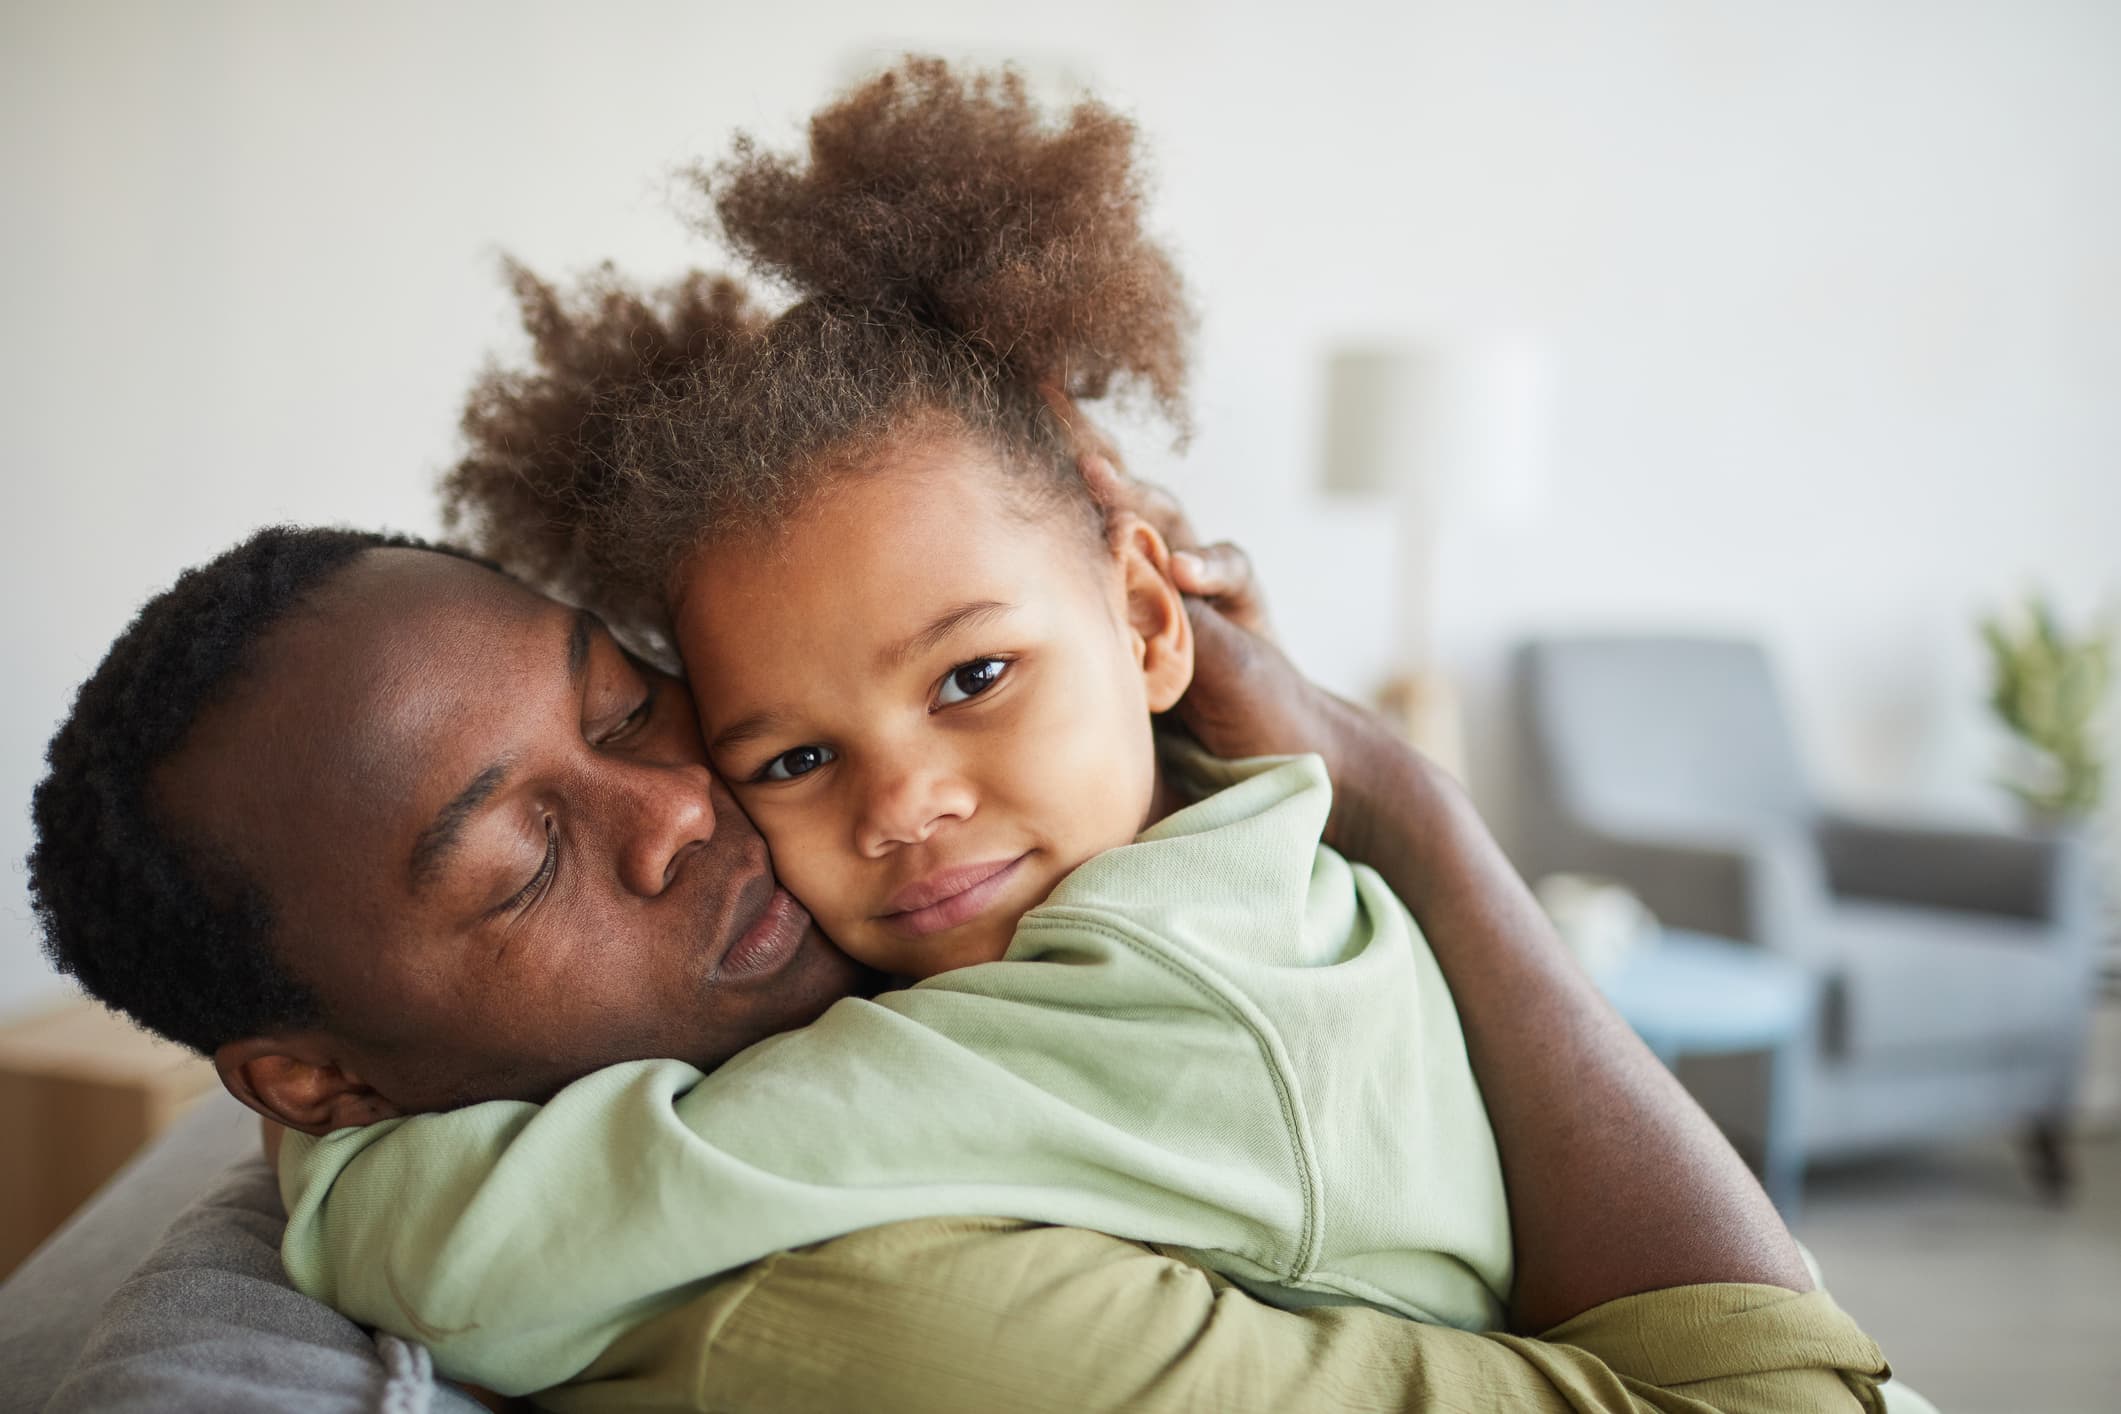 Portrait of cute African-American girl embracing father and looking at camera in cozy home interior, copy space